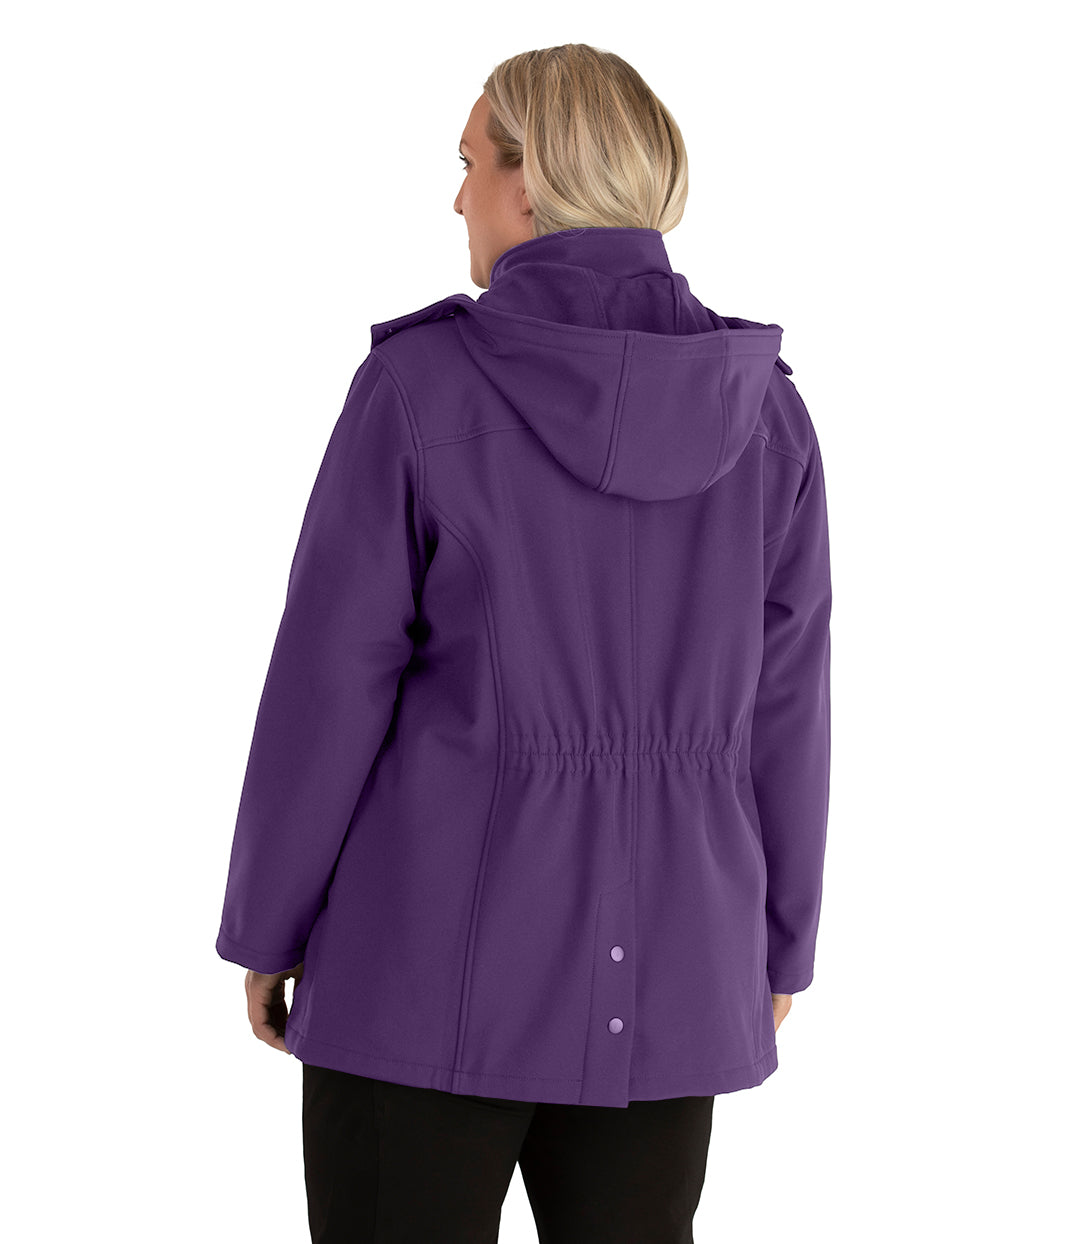 Plus size woman, back view with hood down, wearing a JunoActive plus size Hooded Softshell Jacket in Amethyst Purple. The jacket has a removeable hood, cinched waist, and snap vent at the center back hem. The length of the plus size jacket hits below the hips.